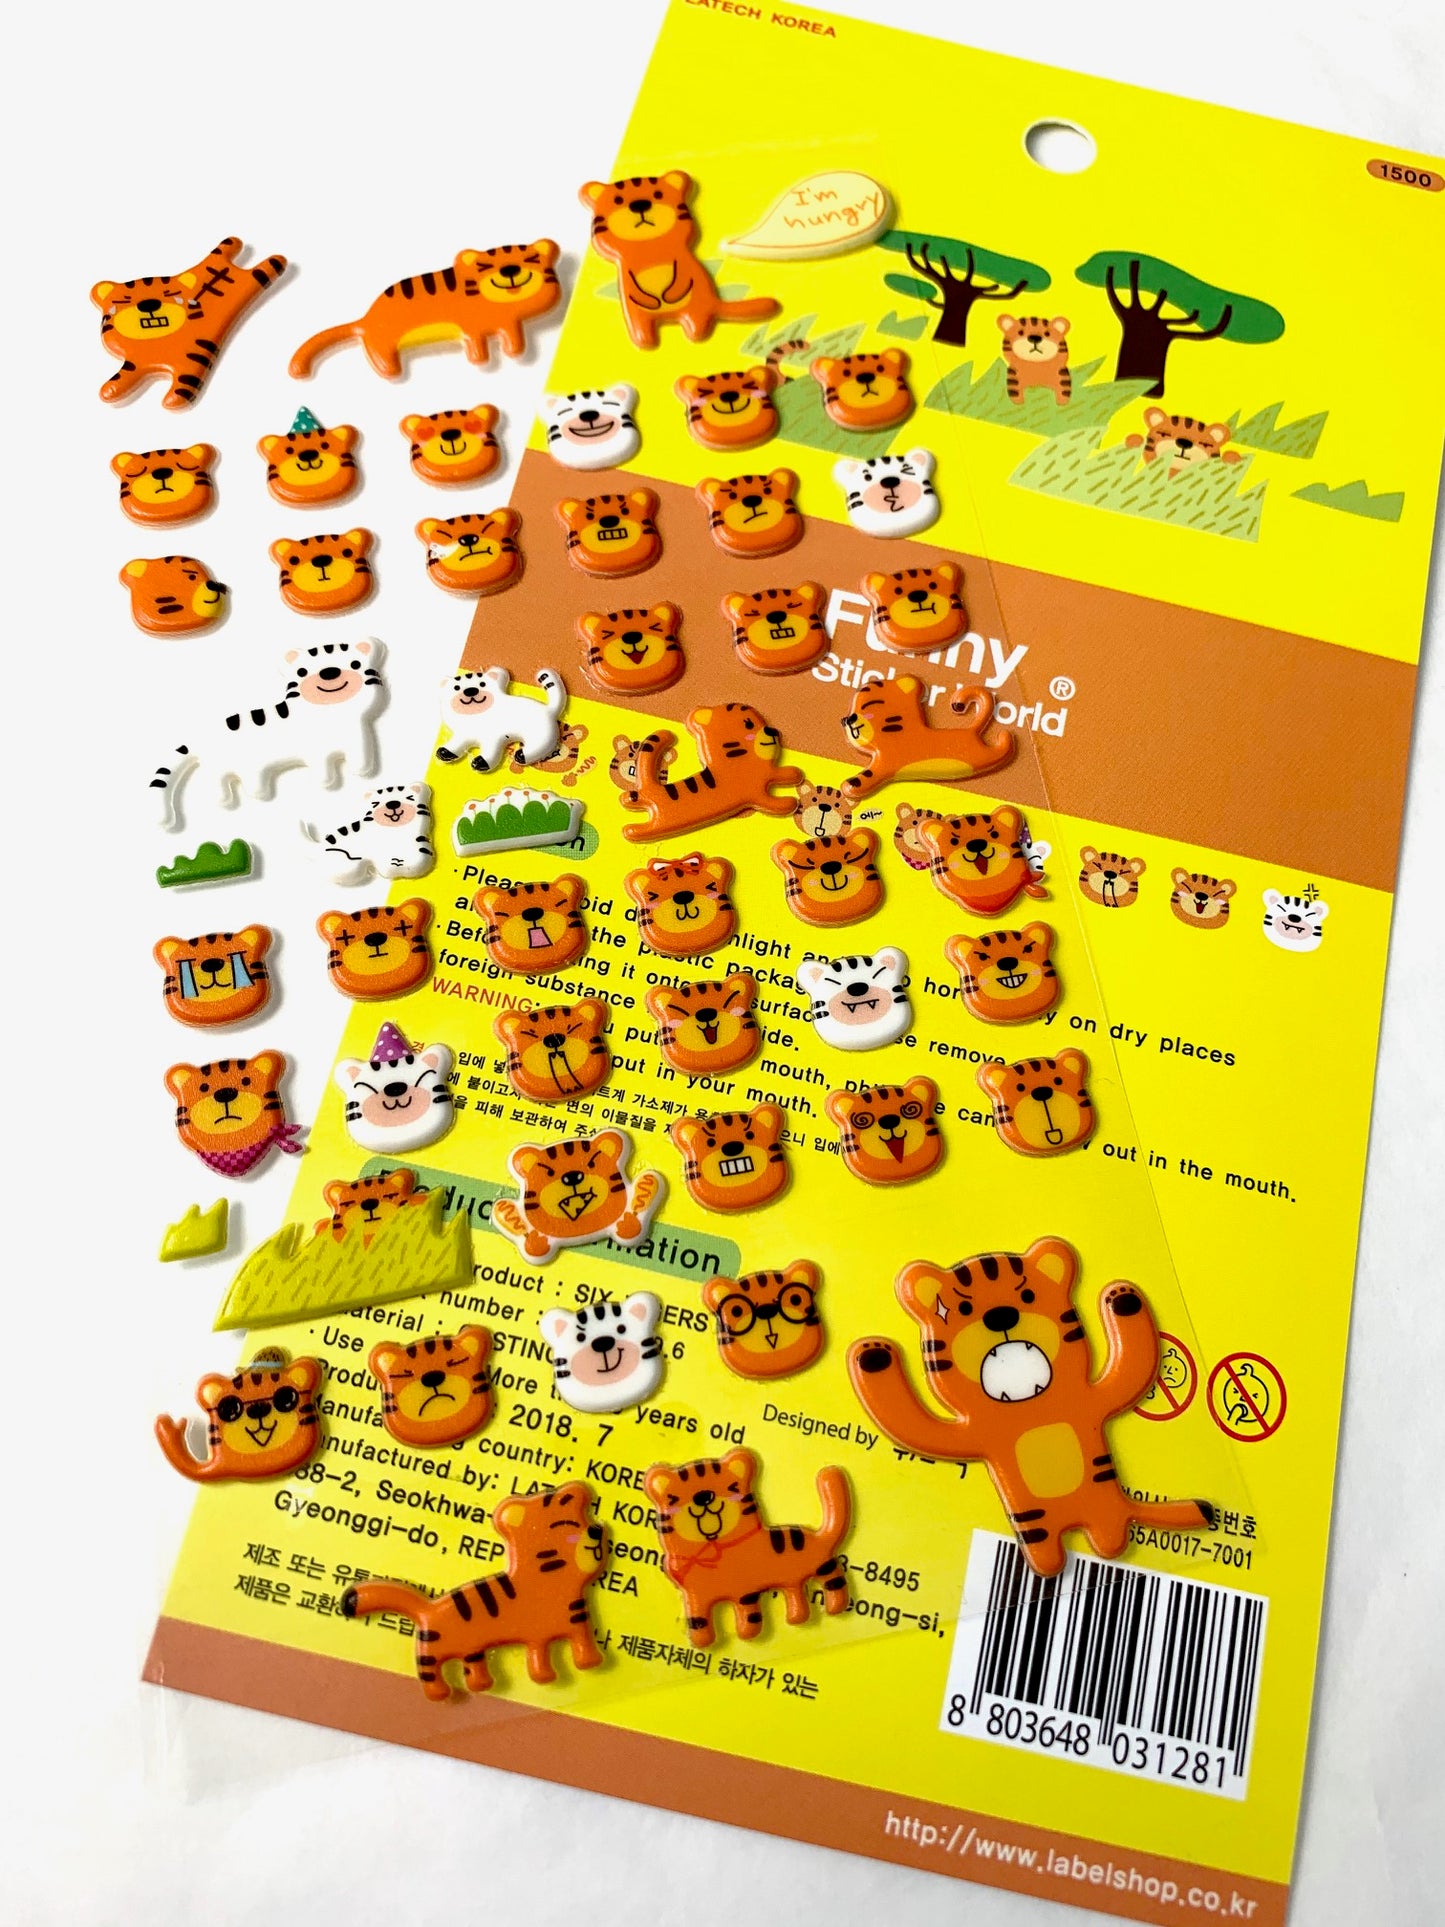 X 31281 TIGER SOFT PUFFY STICKERS-DISCONTINUED